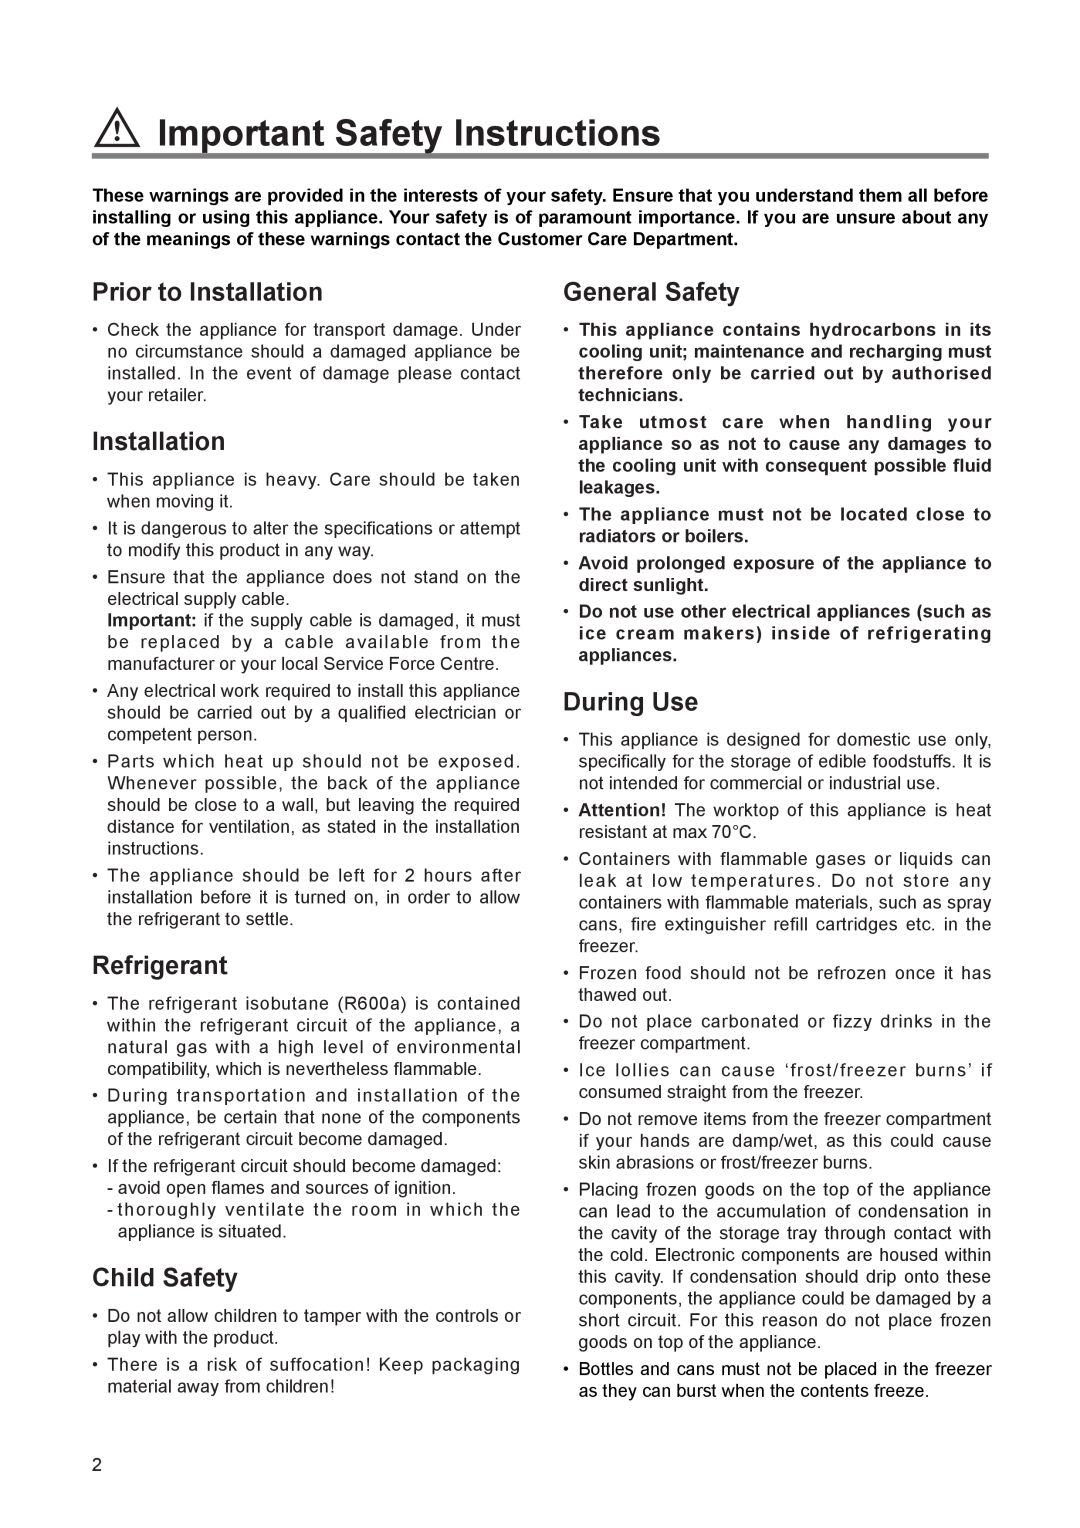 Zanussi ZF 56 SI manual Important Safety Instructions, Prior to Installation, Refrigerant, Child Safety, General Safety 